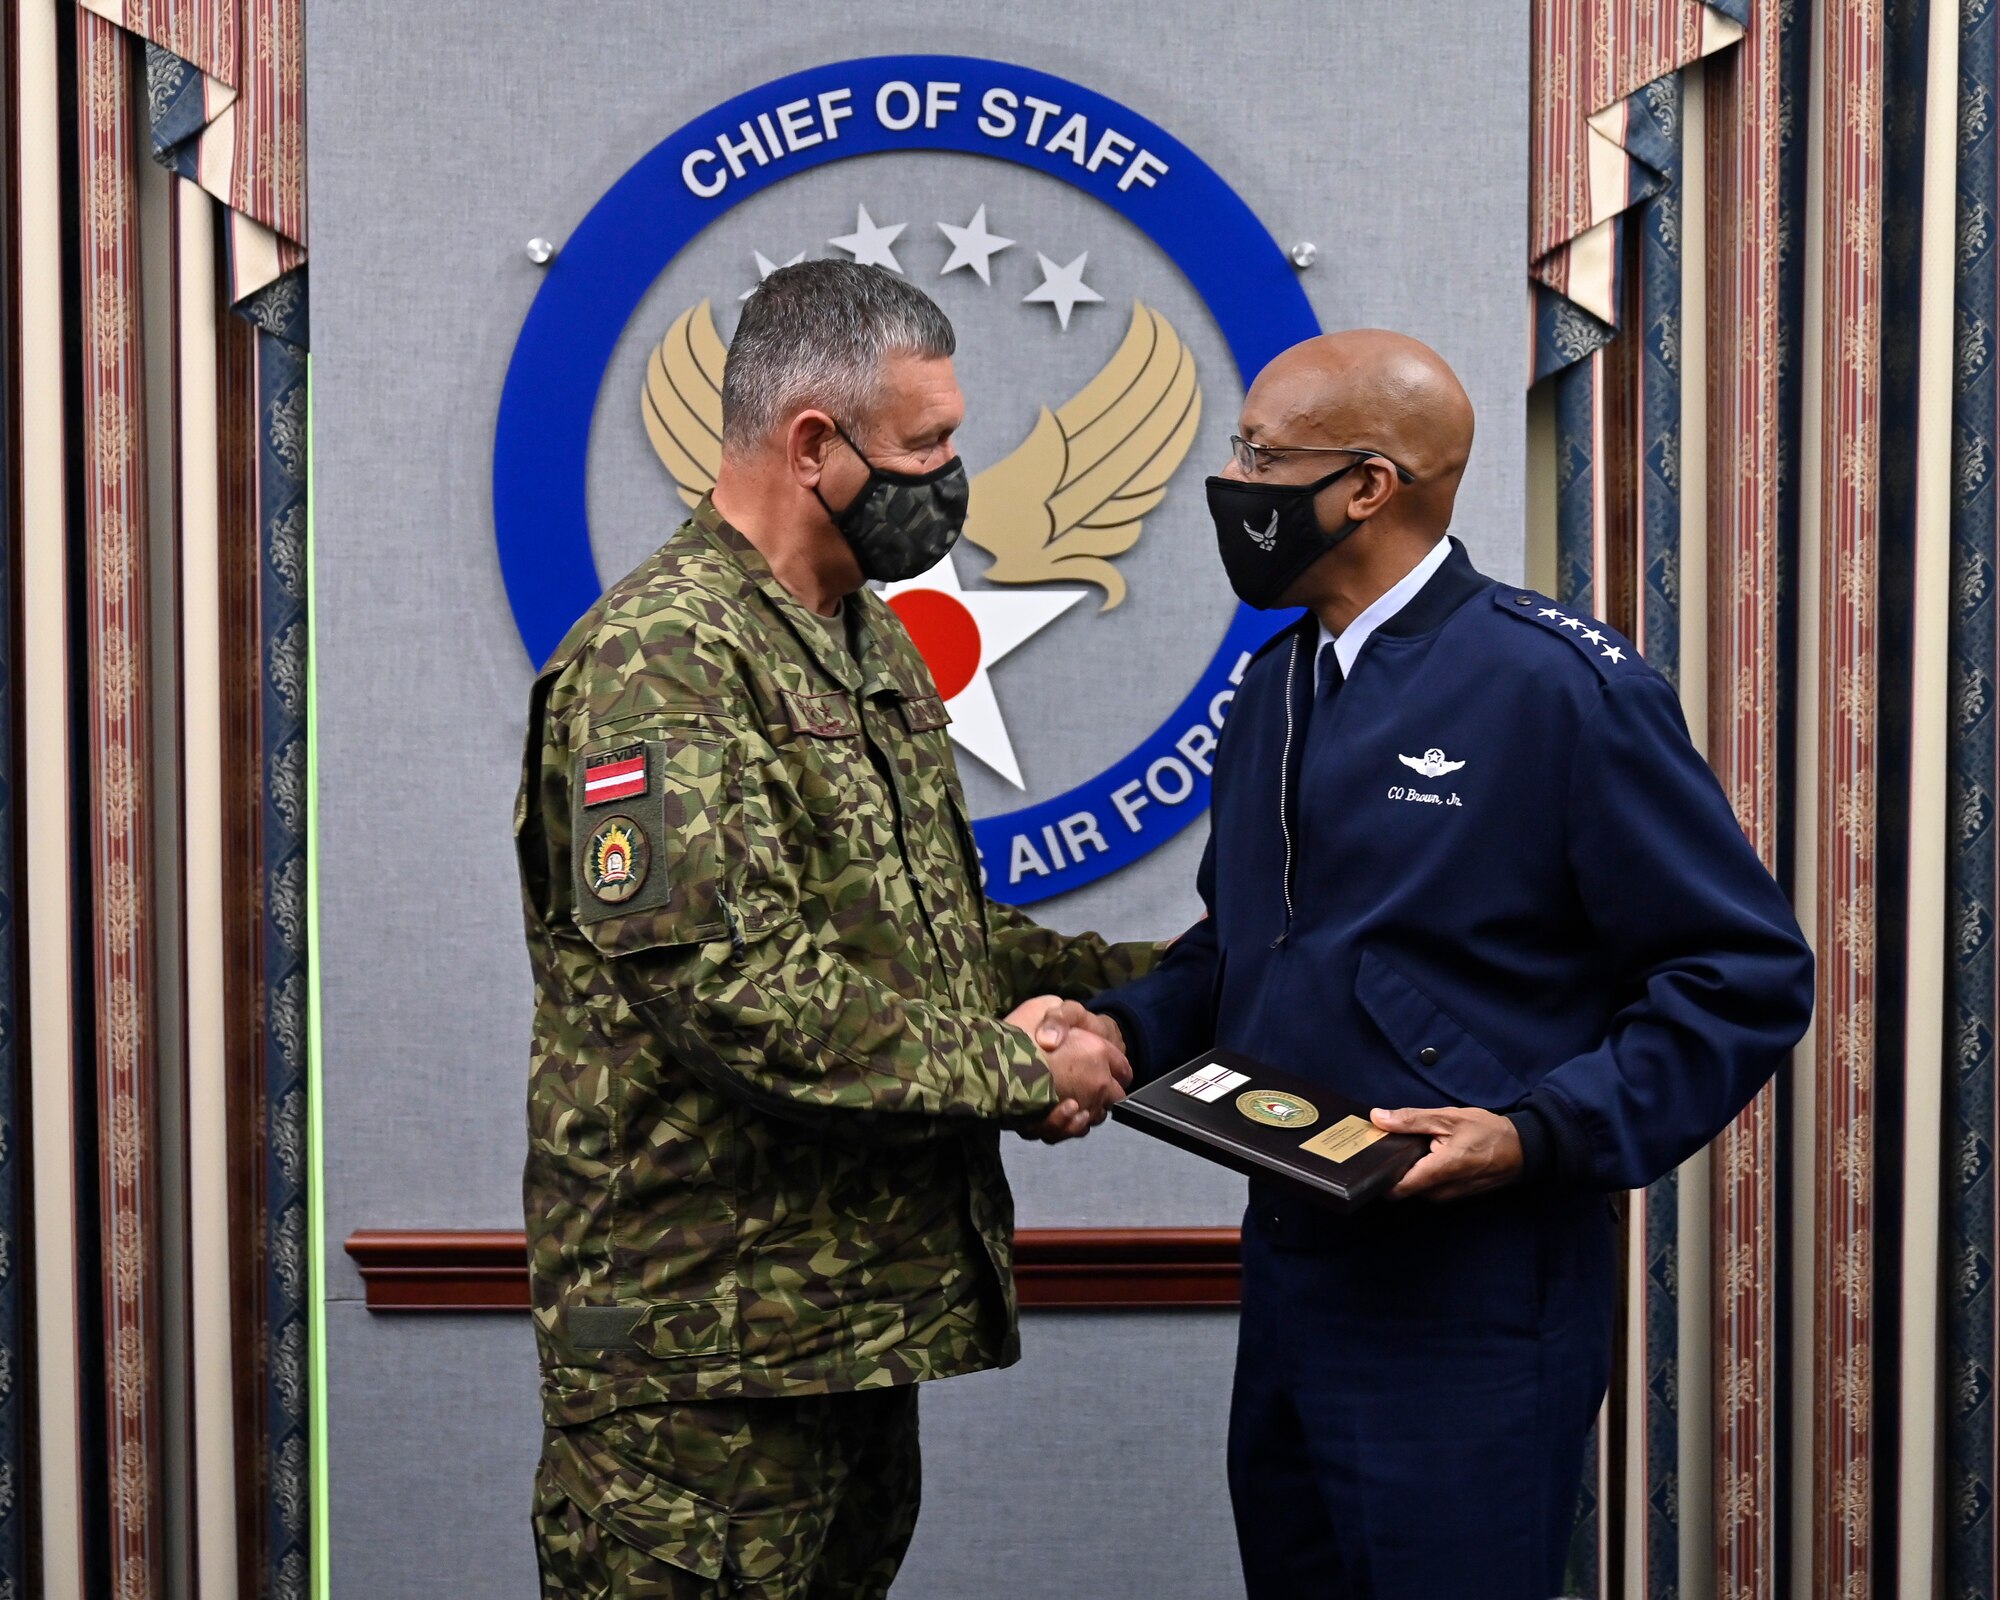 Air Force Chief of Staff Gen. CQ Brown, Jr. shakes hands with Lt. Gen. Leonids Kalnins, Latvia chief of defense